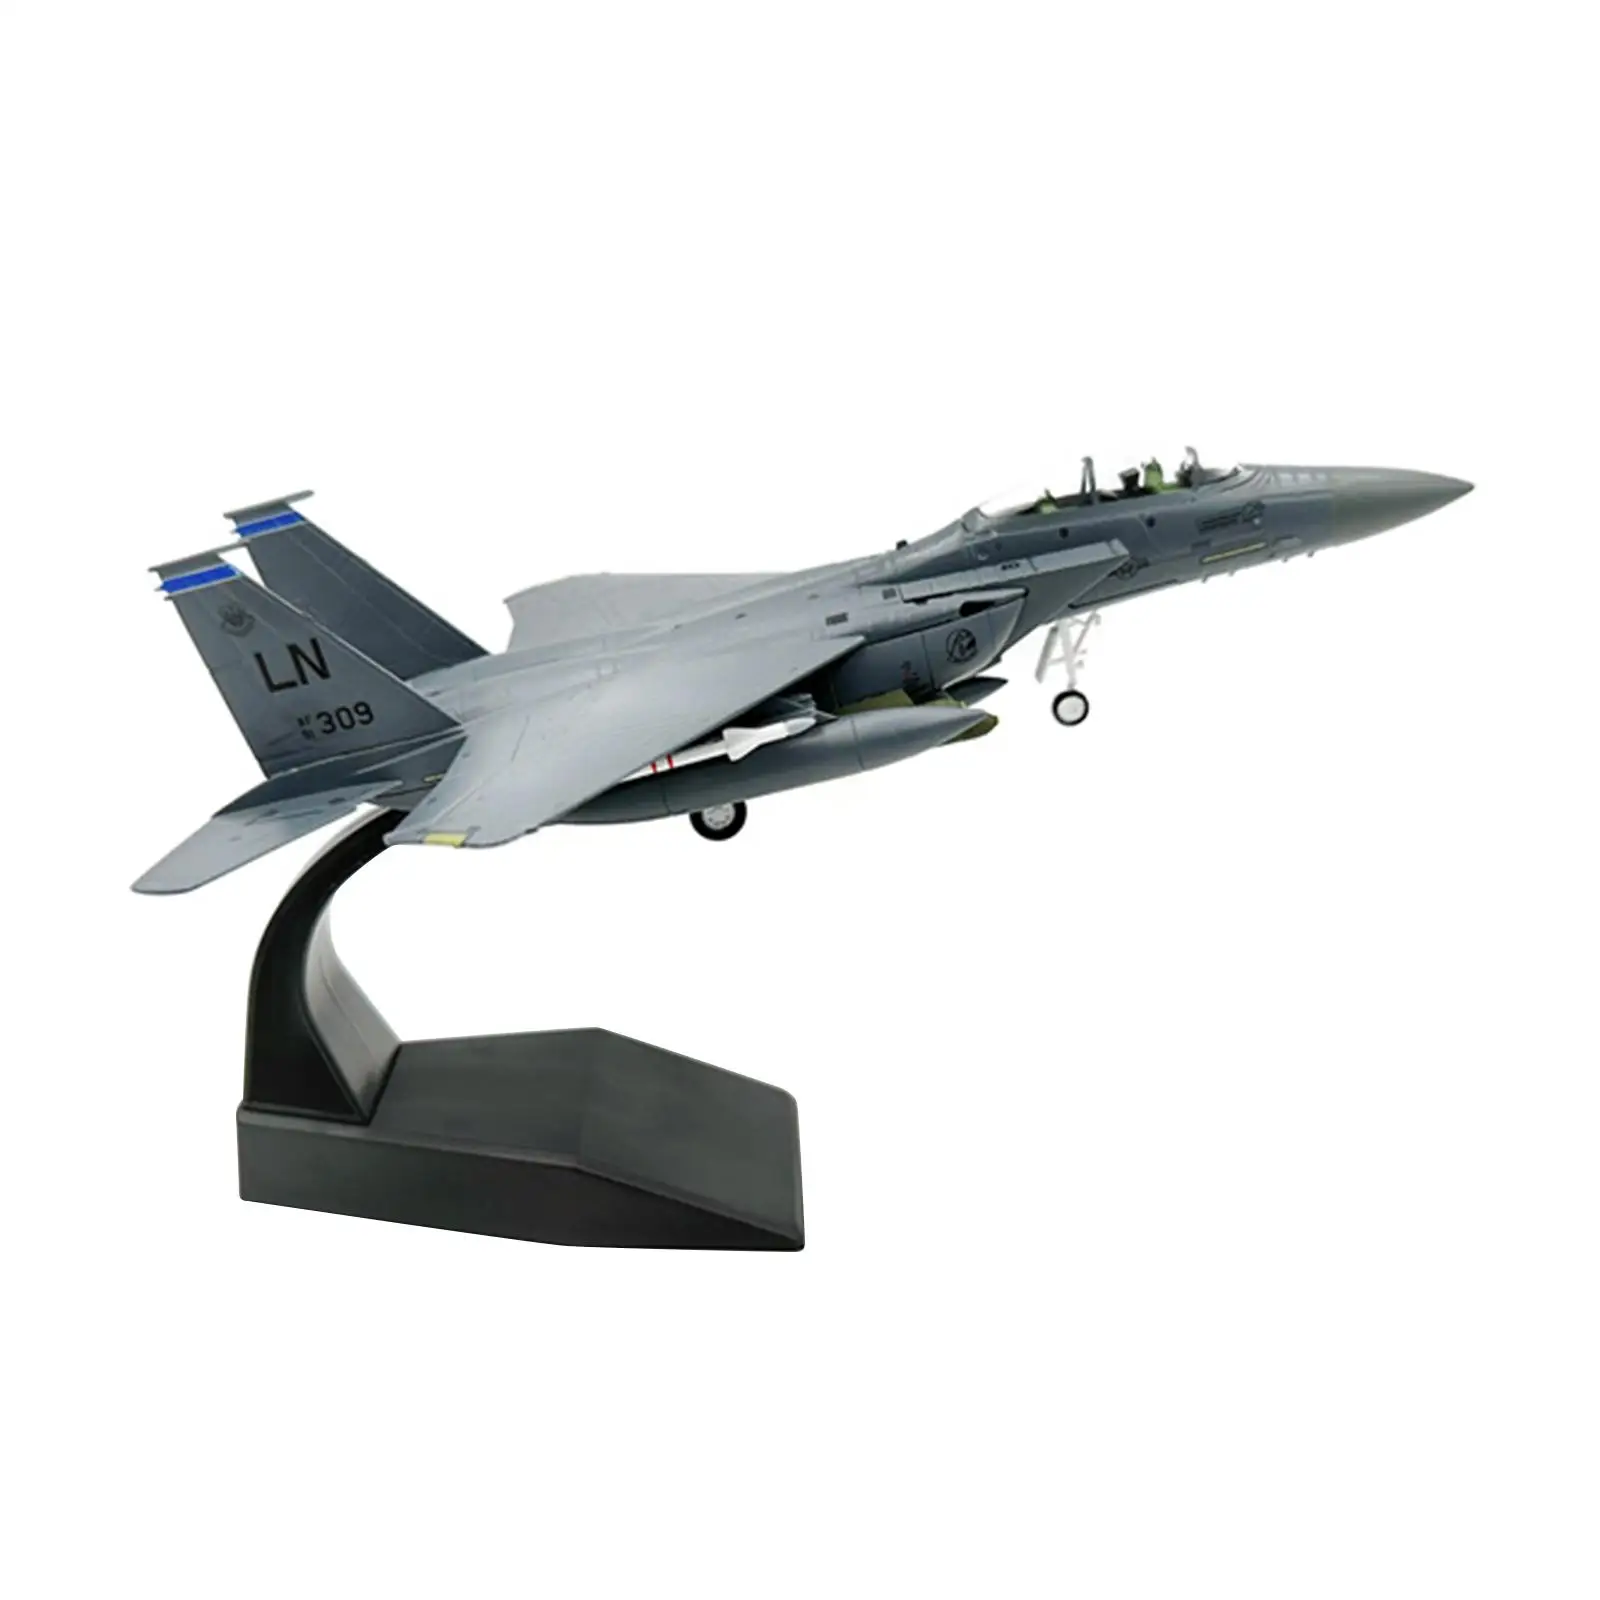 

1/100 F15E Fighter Kids Toys Diecast Alloy Model Collection Aircraft Ornament Airplane for Office Home Bar Bookshelf Living Room